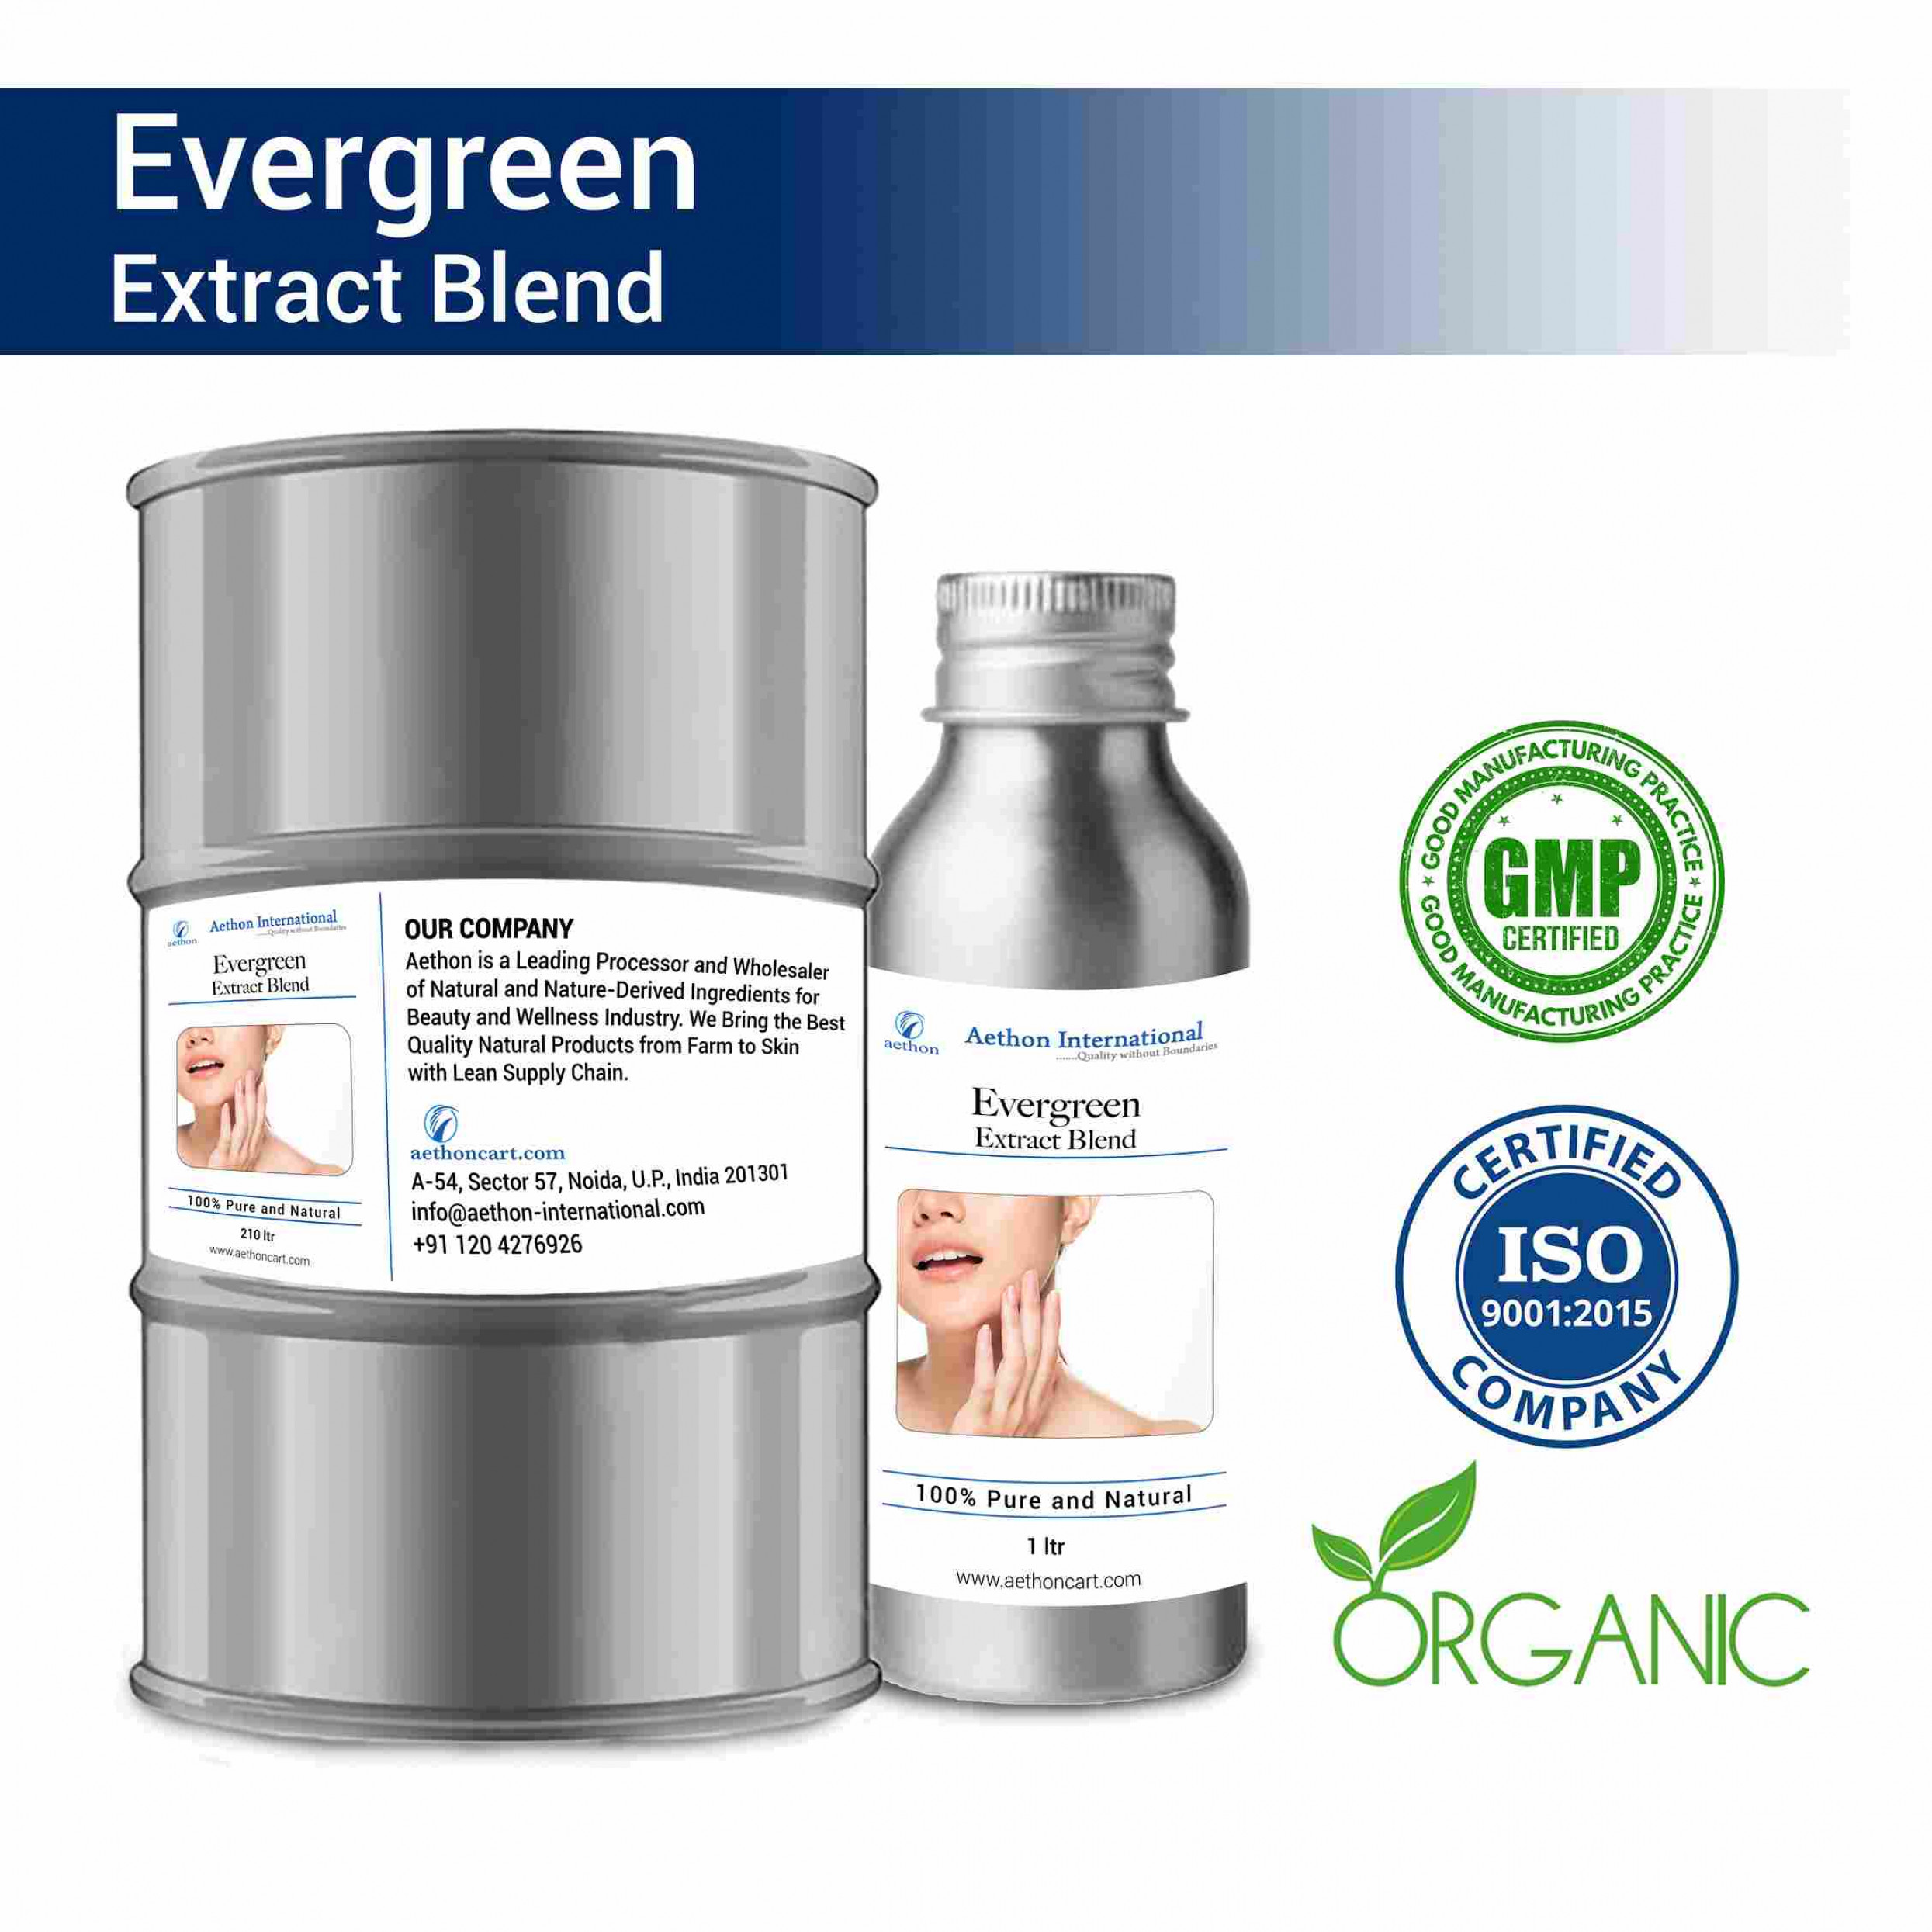 Evergreen Extract Blend (Oil)